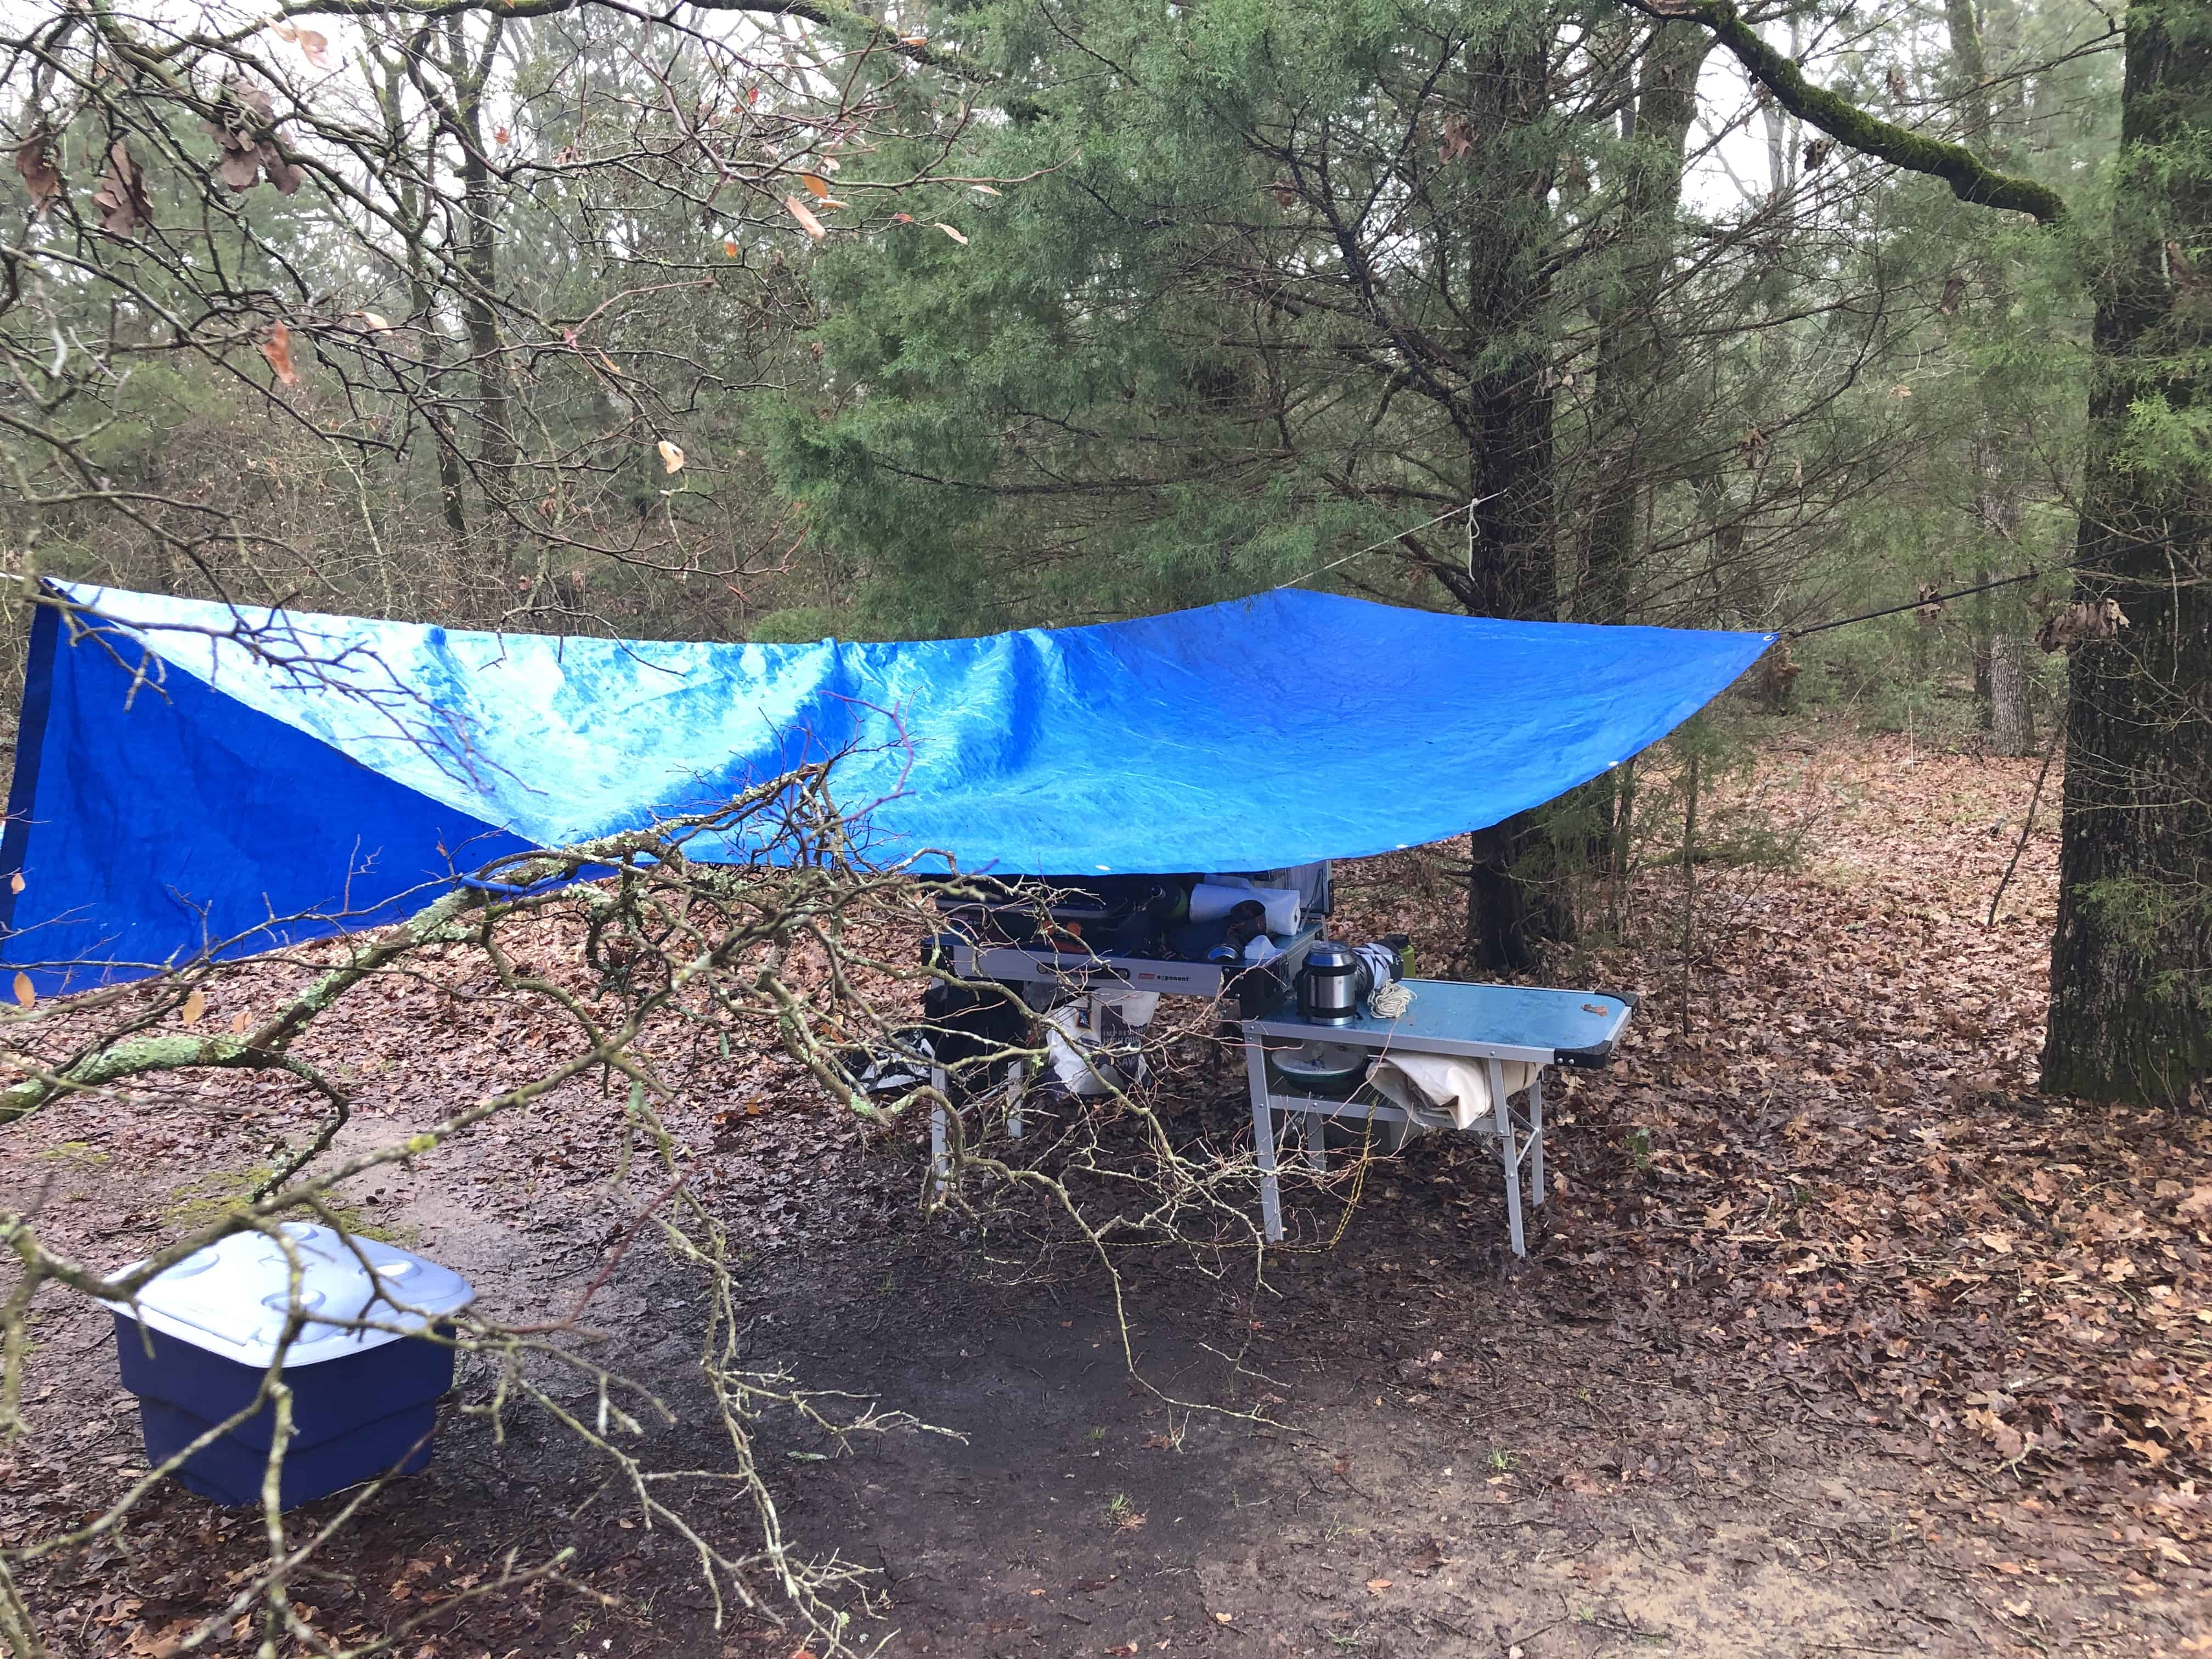 Photograph of a tarp over a camping kitchen